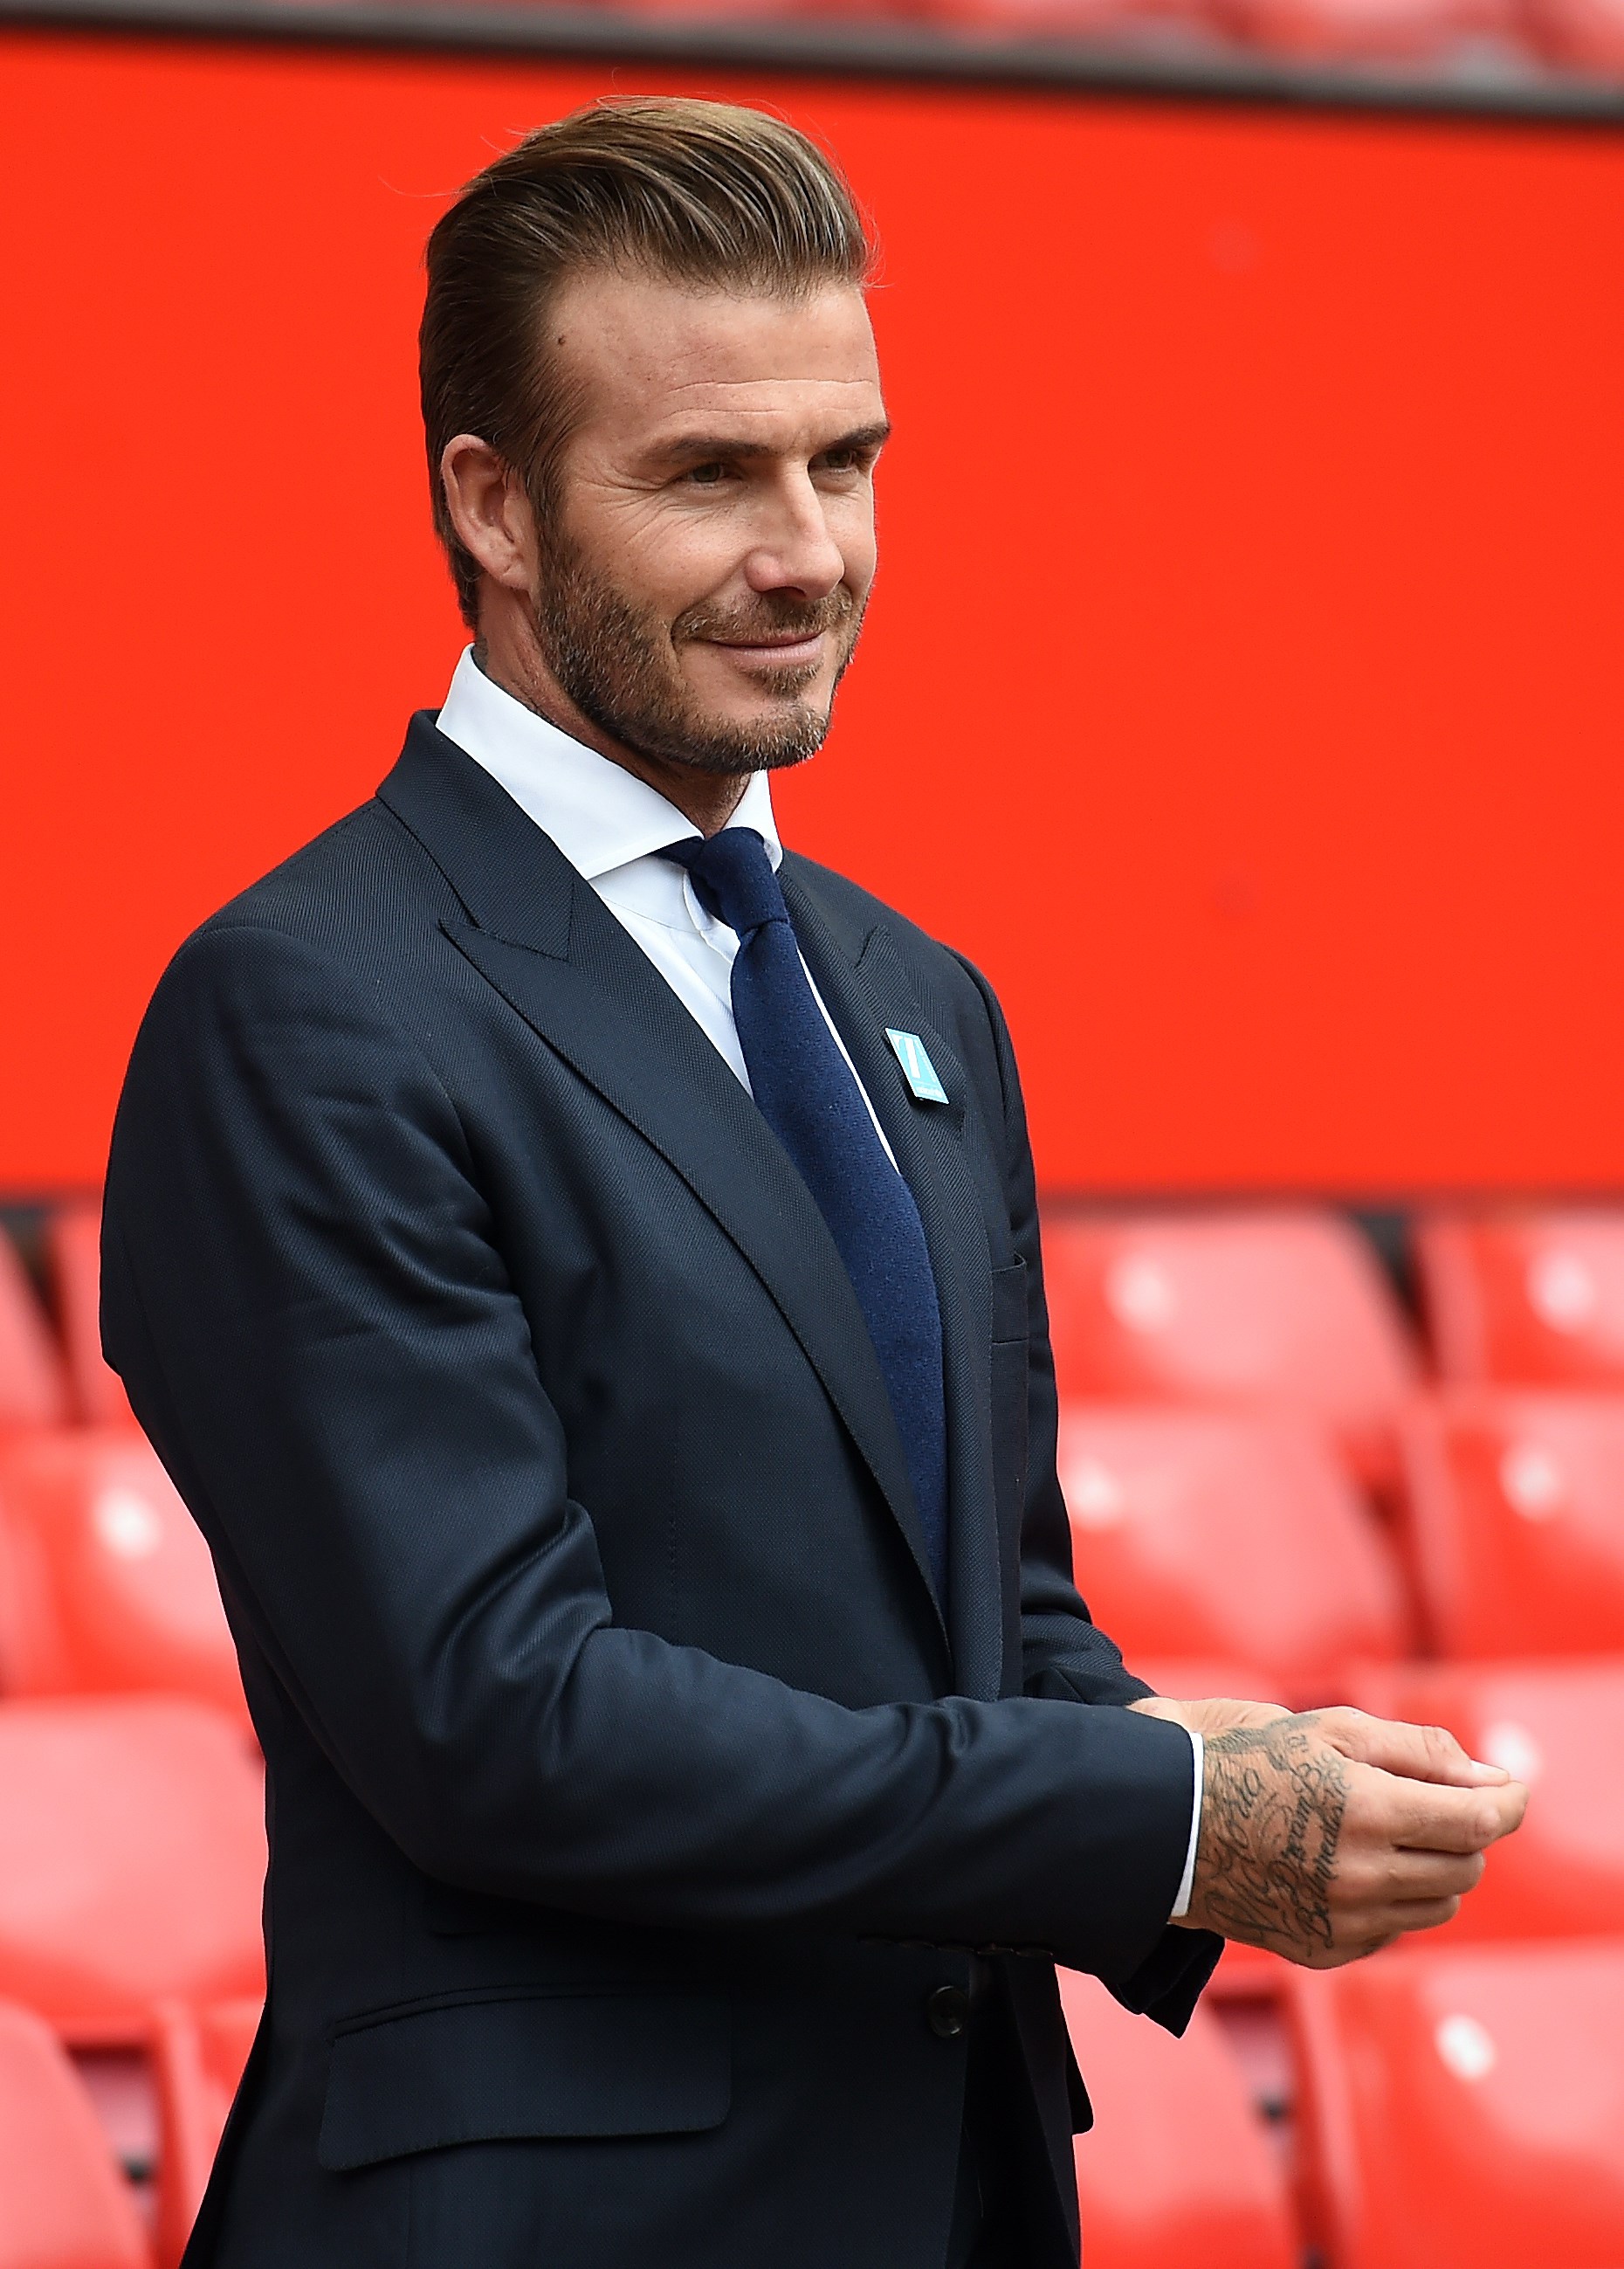 Who Cuts David Beckham's Hair? He Has The Spice Girls To Thank, In Part